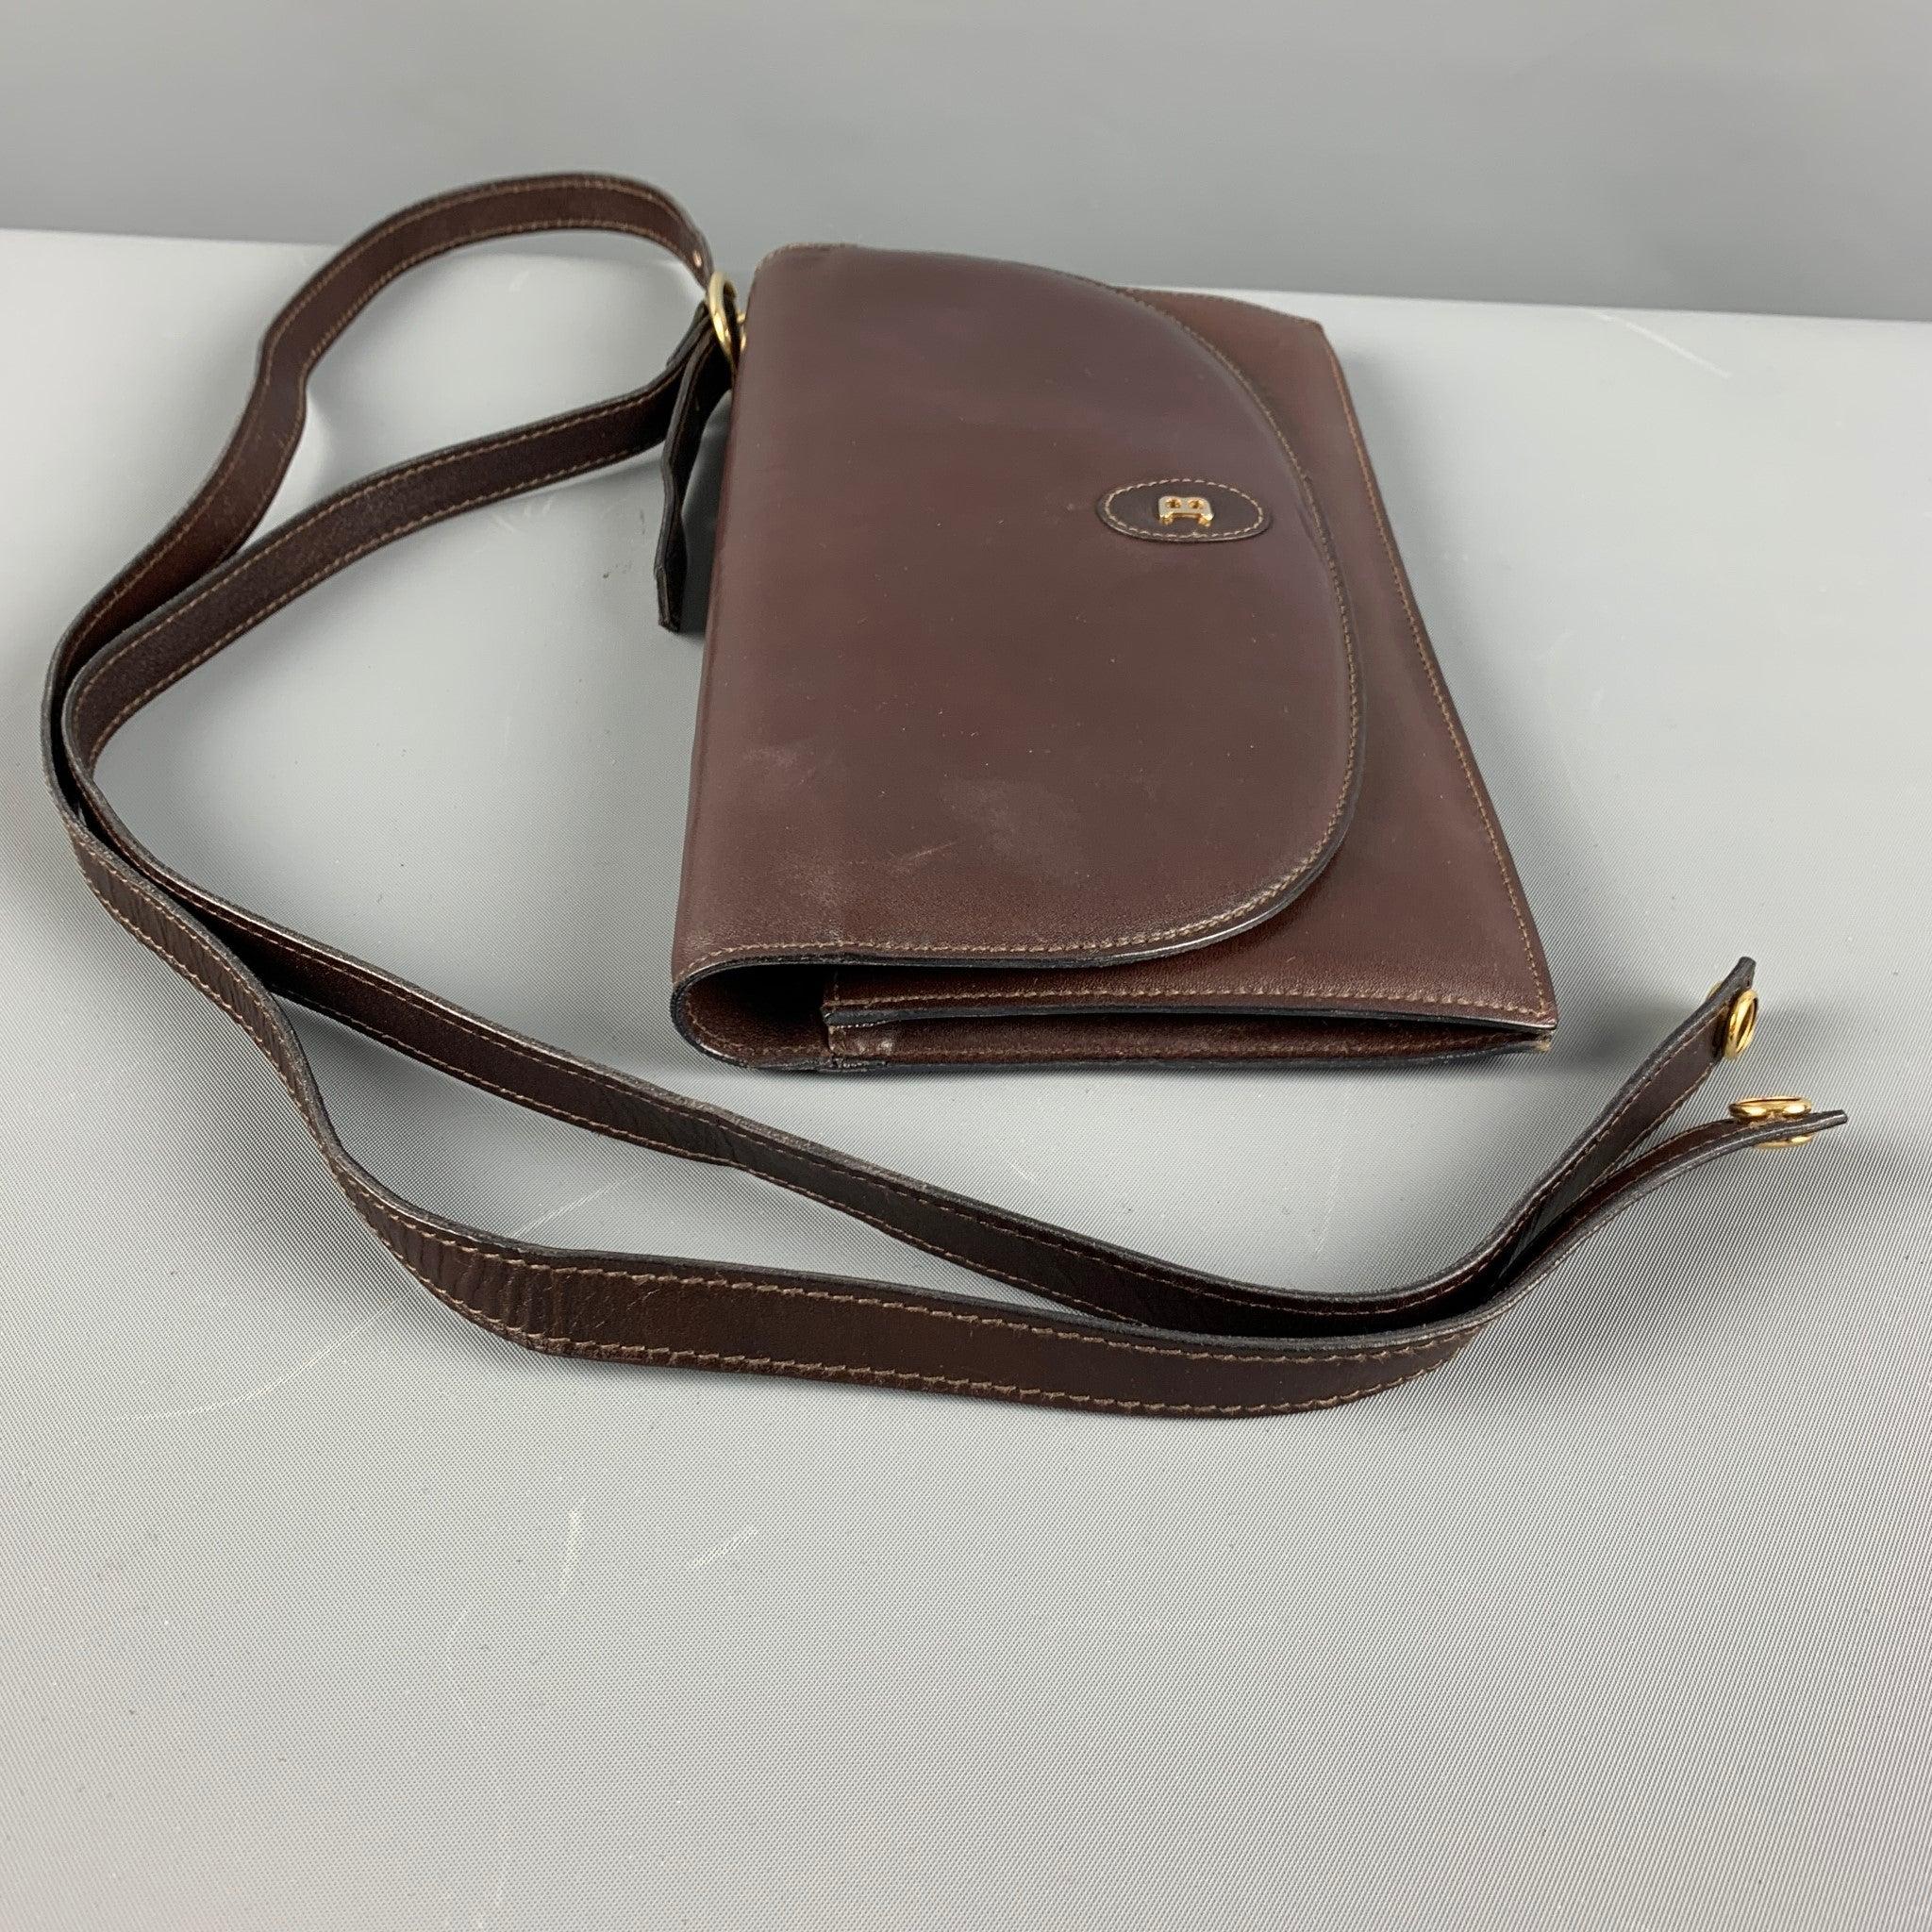 BALLY Vintage handbag comes in a brown leather featuring inner zipper pocket, single inner slot, and detachable strap. Comes with Dust Bag. Made in Italy.Very Good Pre-Owned Condition. Minor signs of wear. 

Measurements: 
  Length: 10 inches